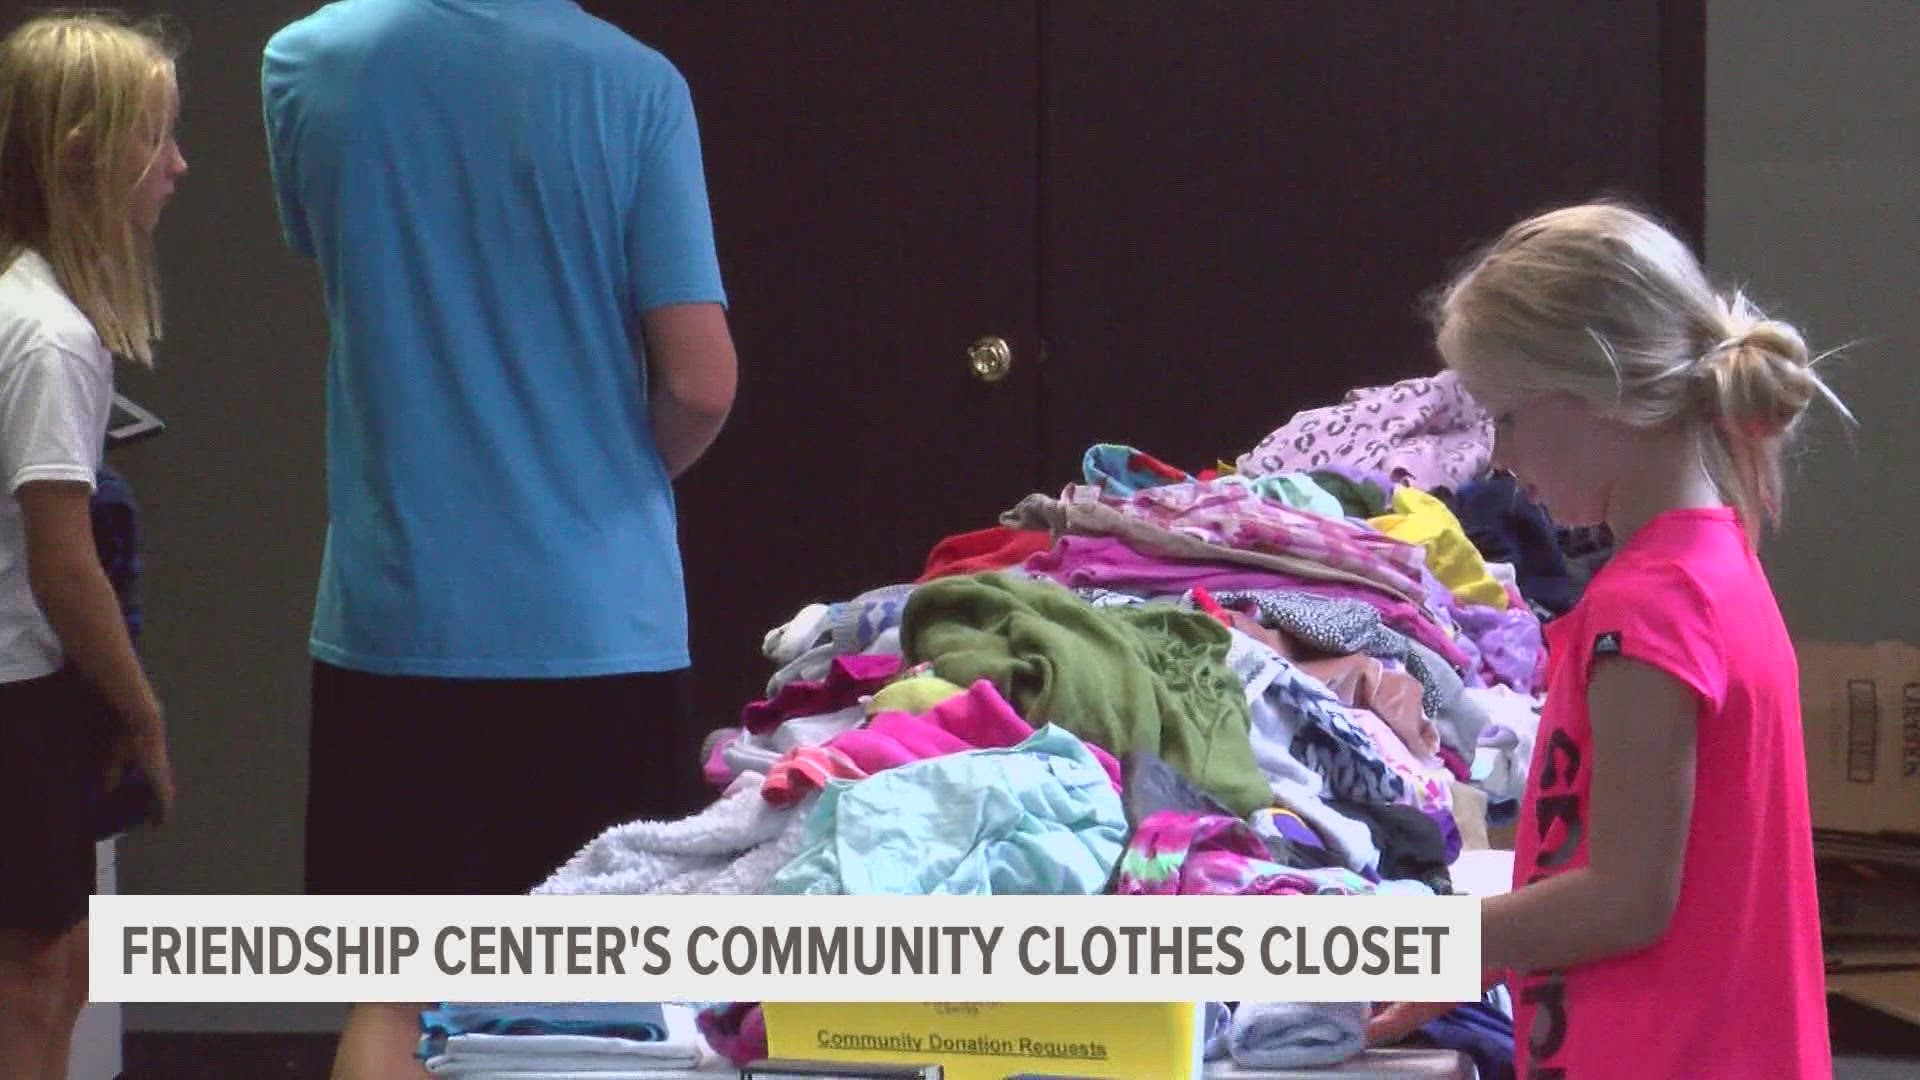 Volunteers and organizers ensure that the Friendship Center's community closet and food pantry is available to those who need it.